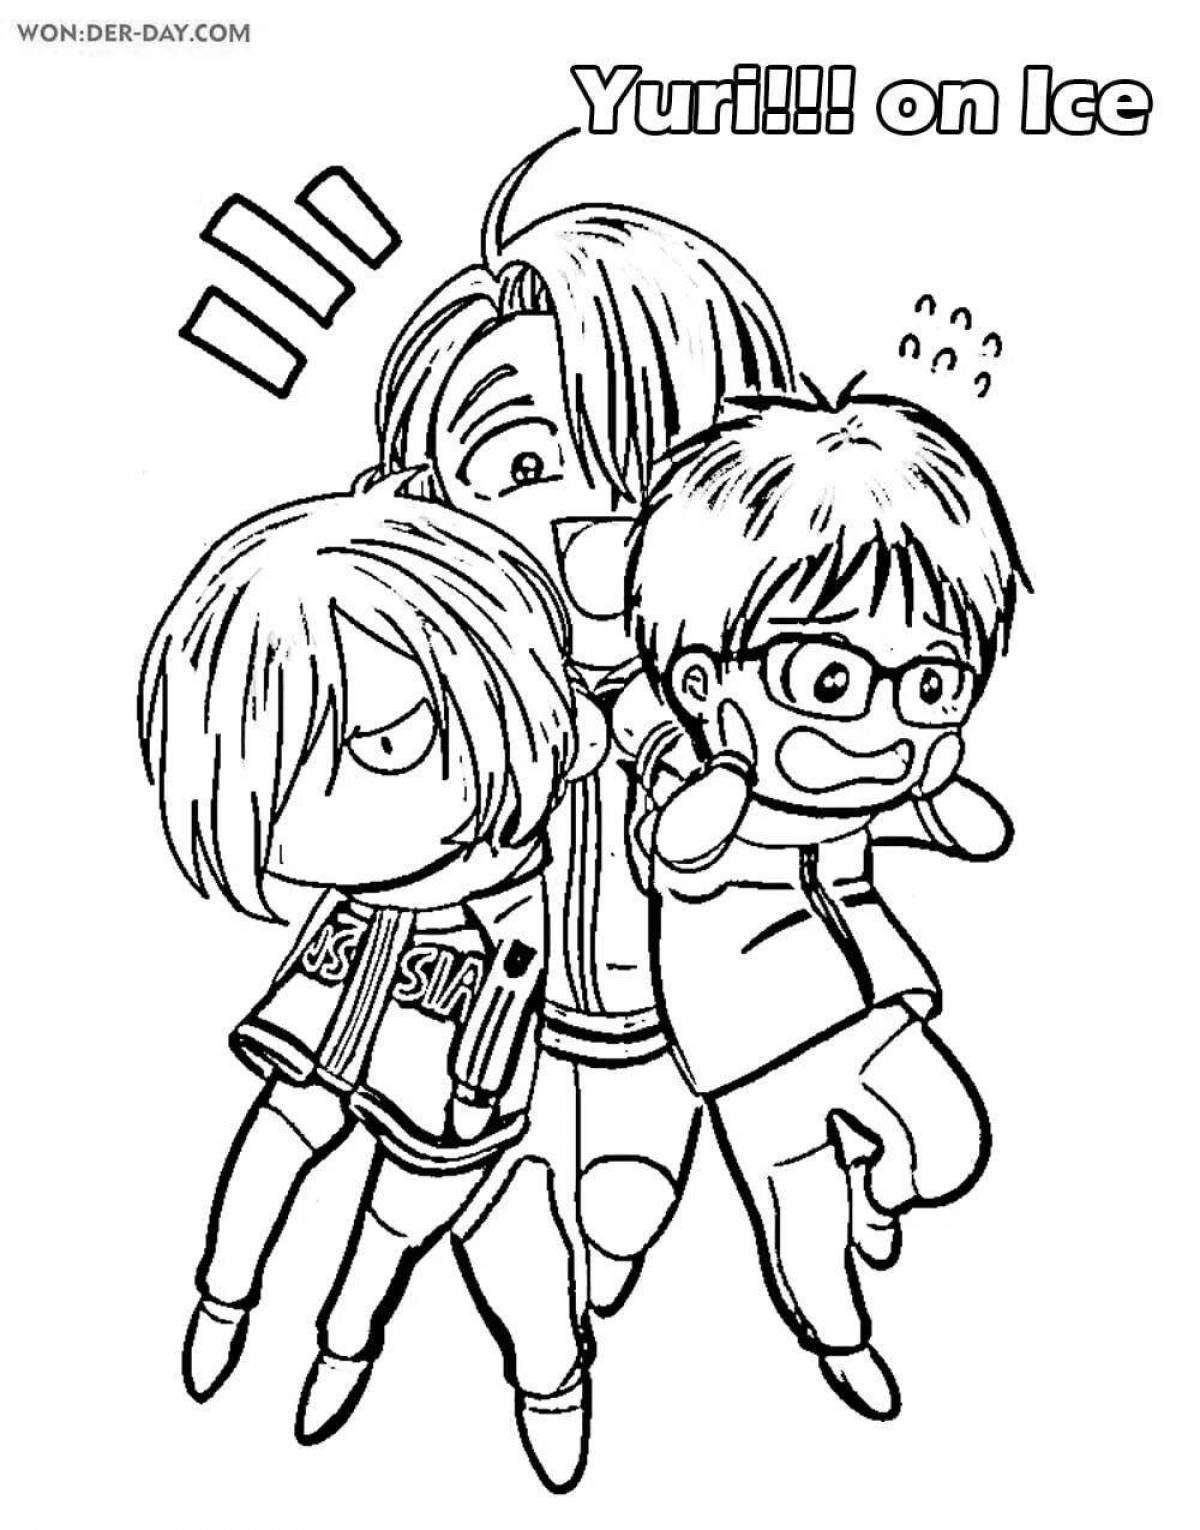 Glorious yuri on ice coloring page